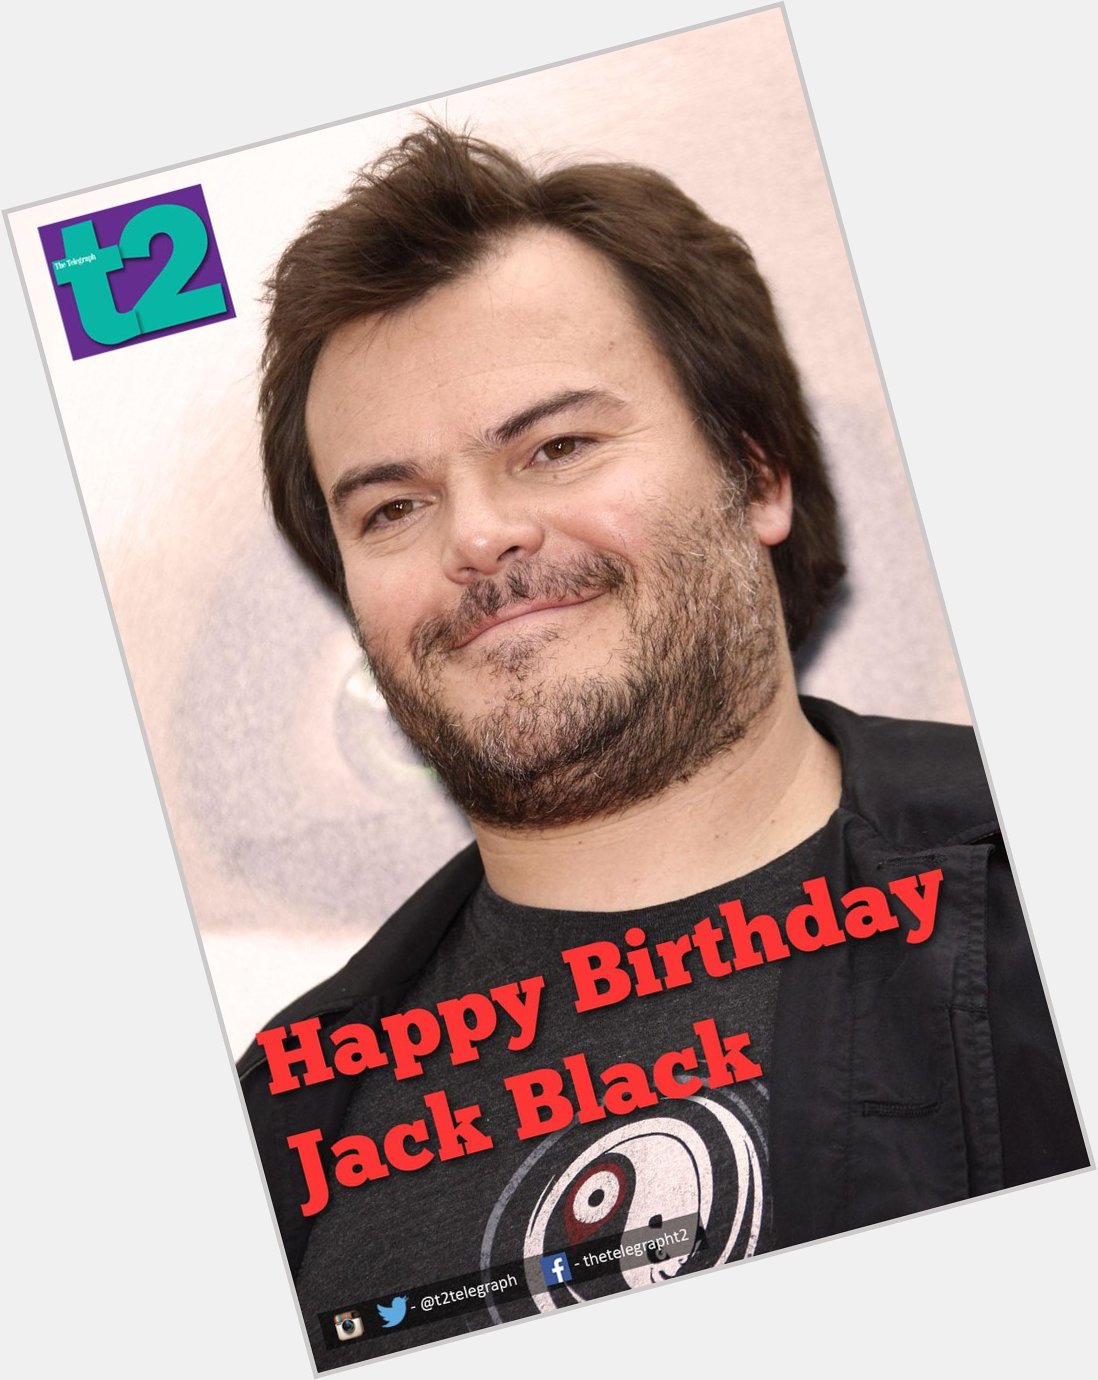 Happy birthday Jack Black!  or which movie did you like him most in? 